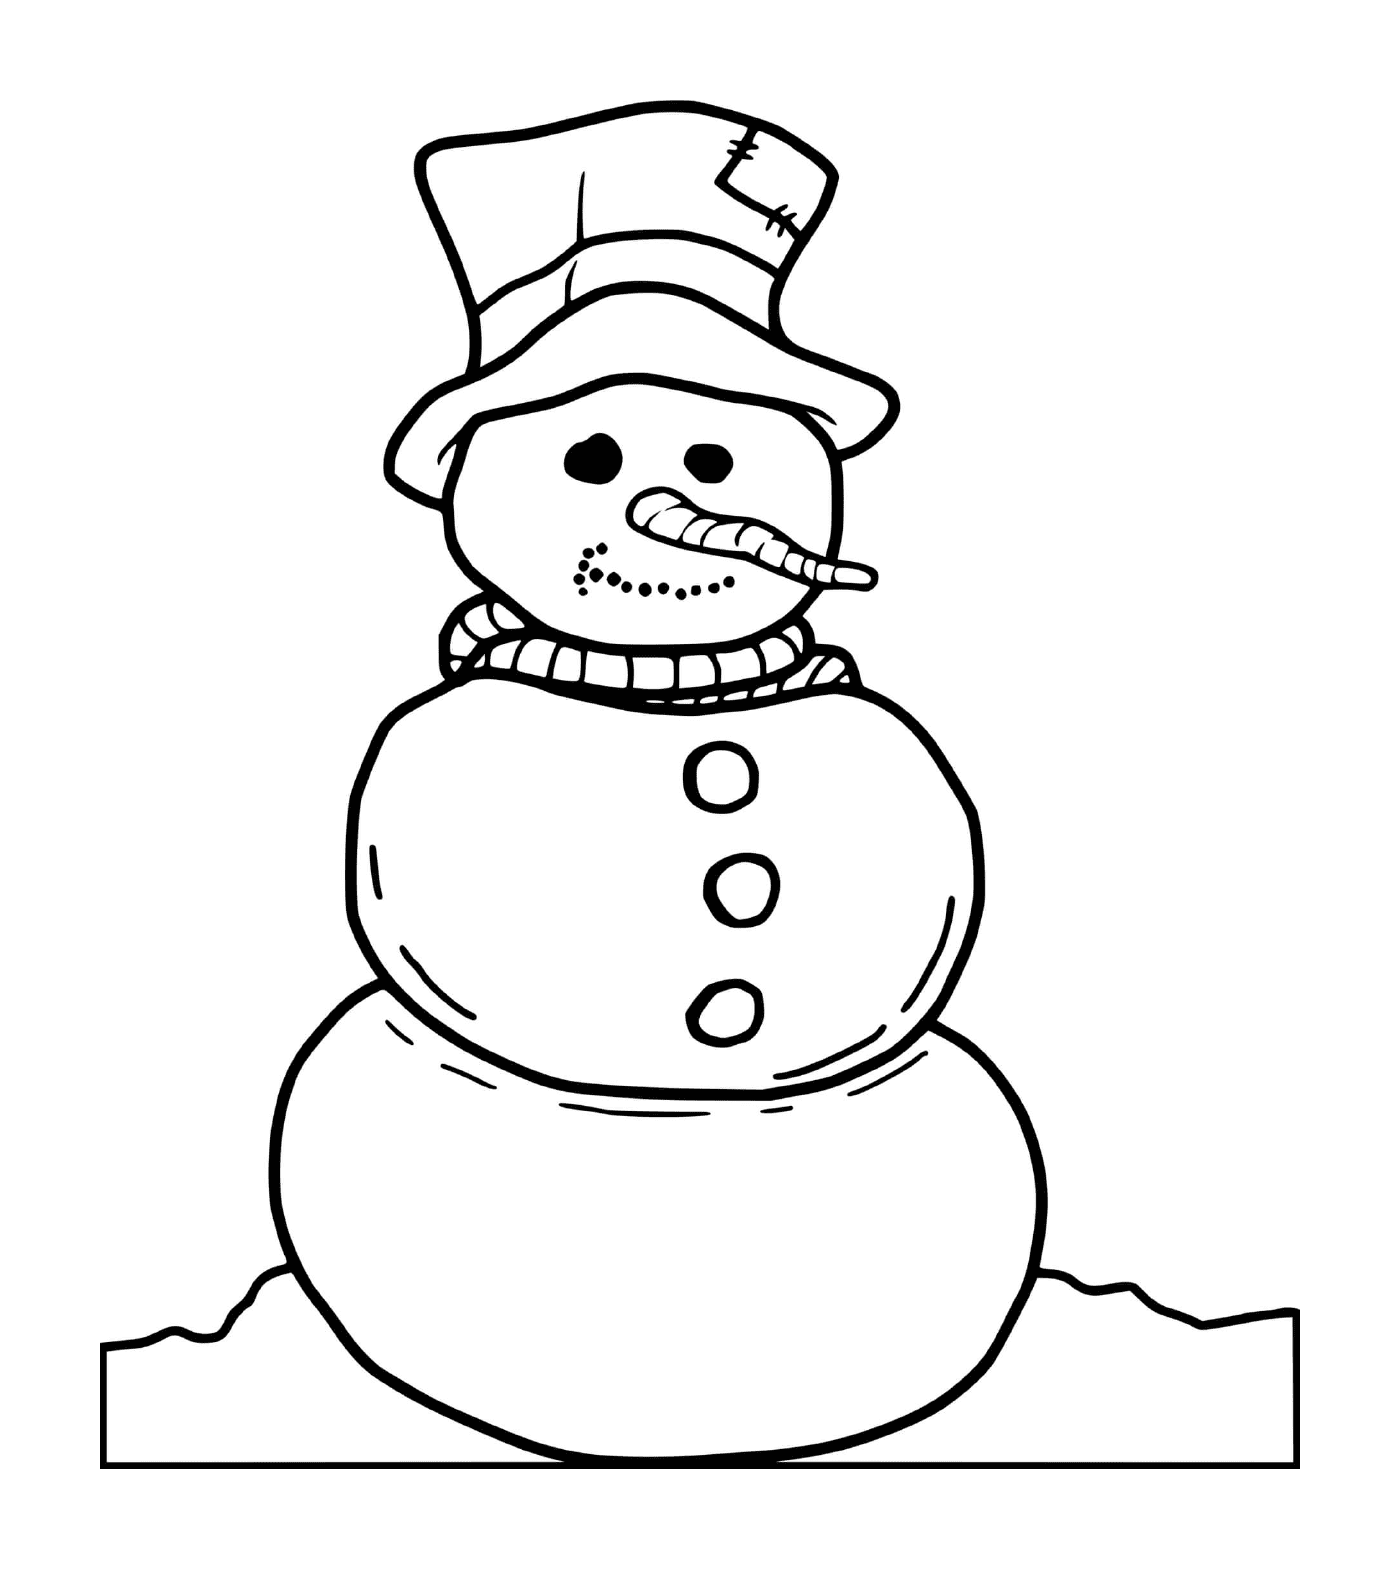  Snowman without arms 